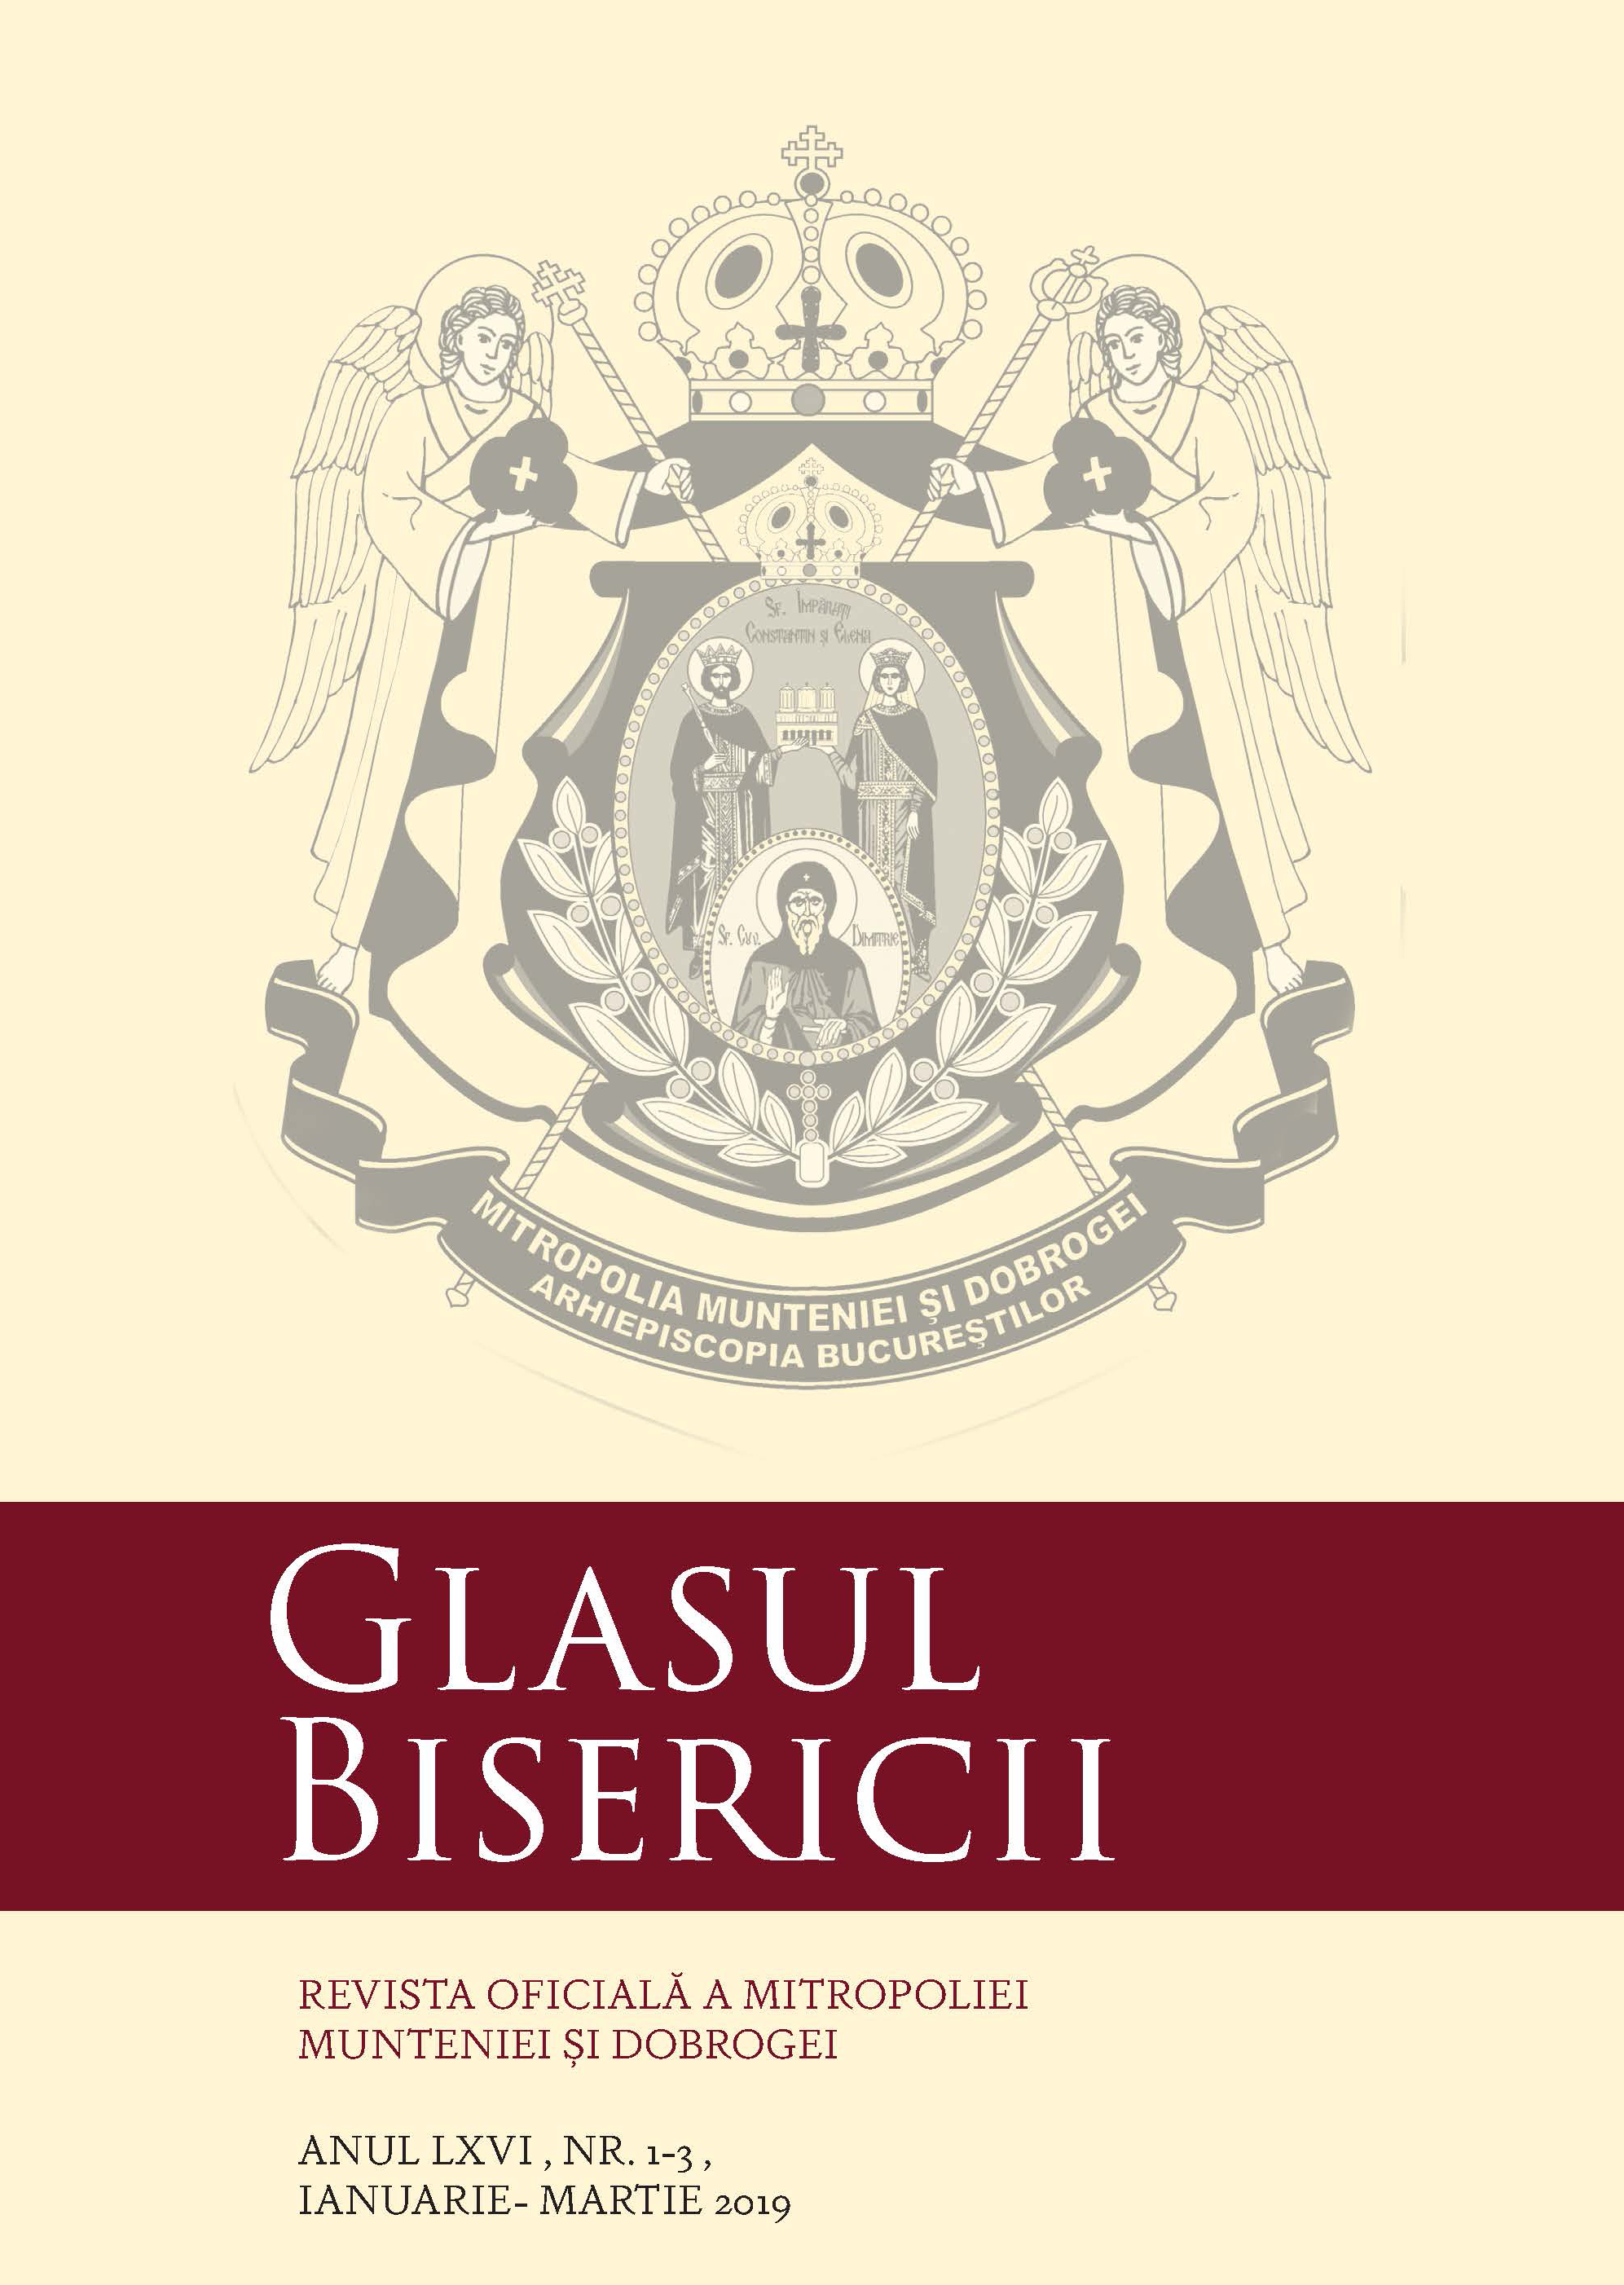 The Journal Glasul Bisericii - a New Graphic & Editorial Concept Cover Image